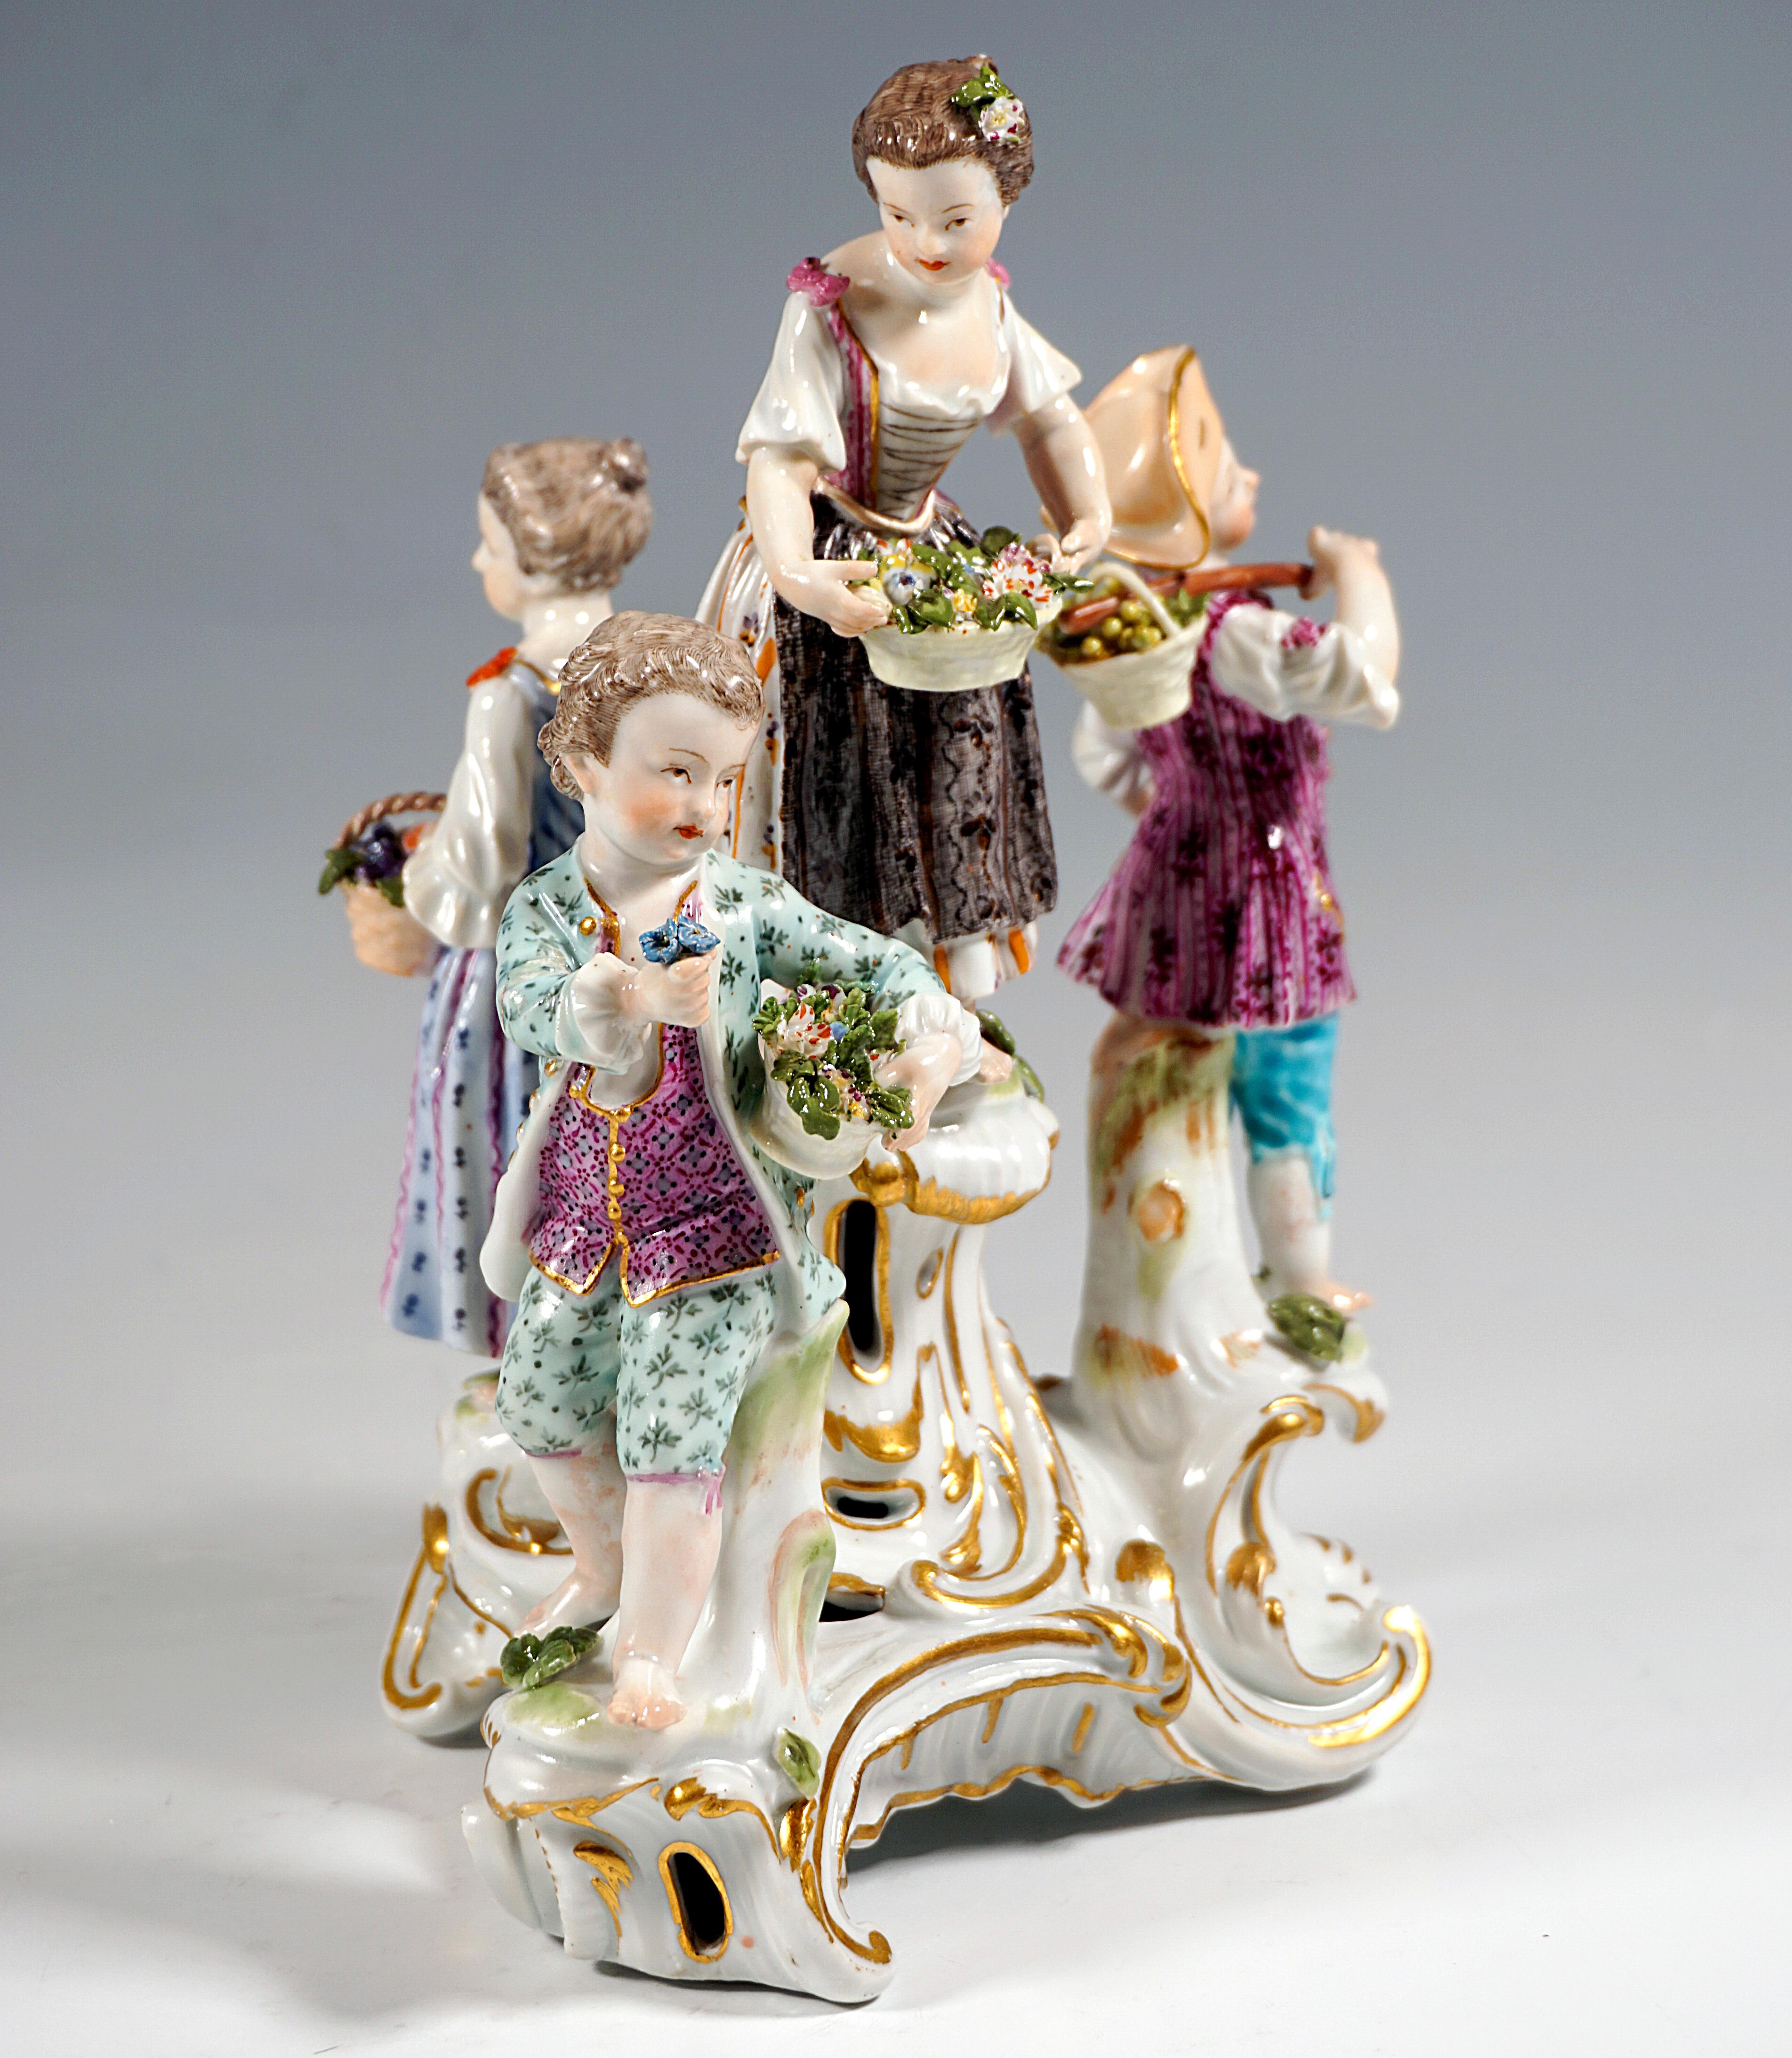 Meissen porcelain group from the time of origin:
Four children in festive, rural rococo clothing on a three-part rocaille base: on the central raised pedestal a girl with a basket of flowers, leaning towards the boy to his right on a lower step,